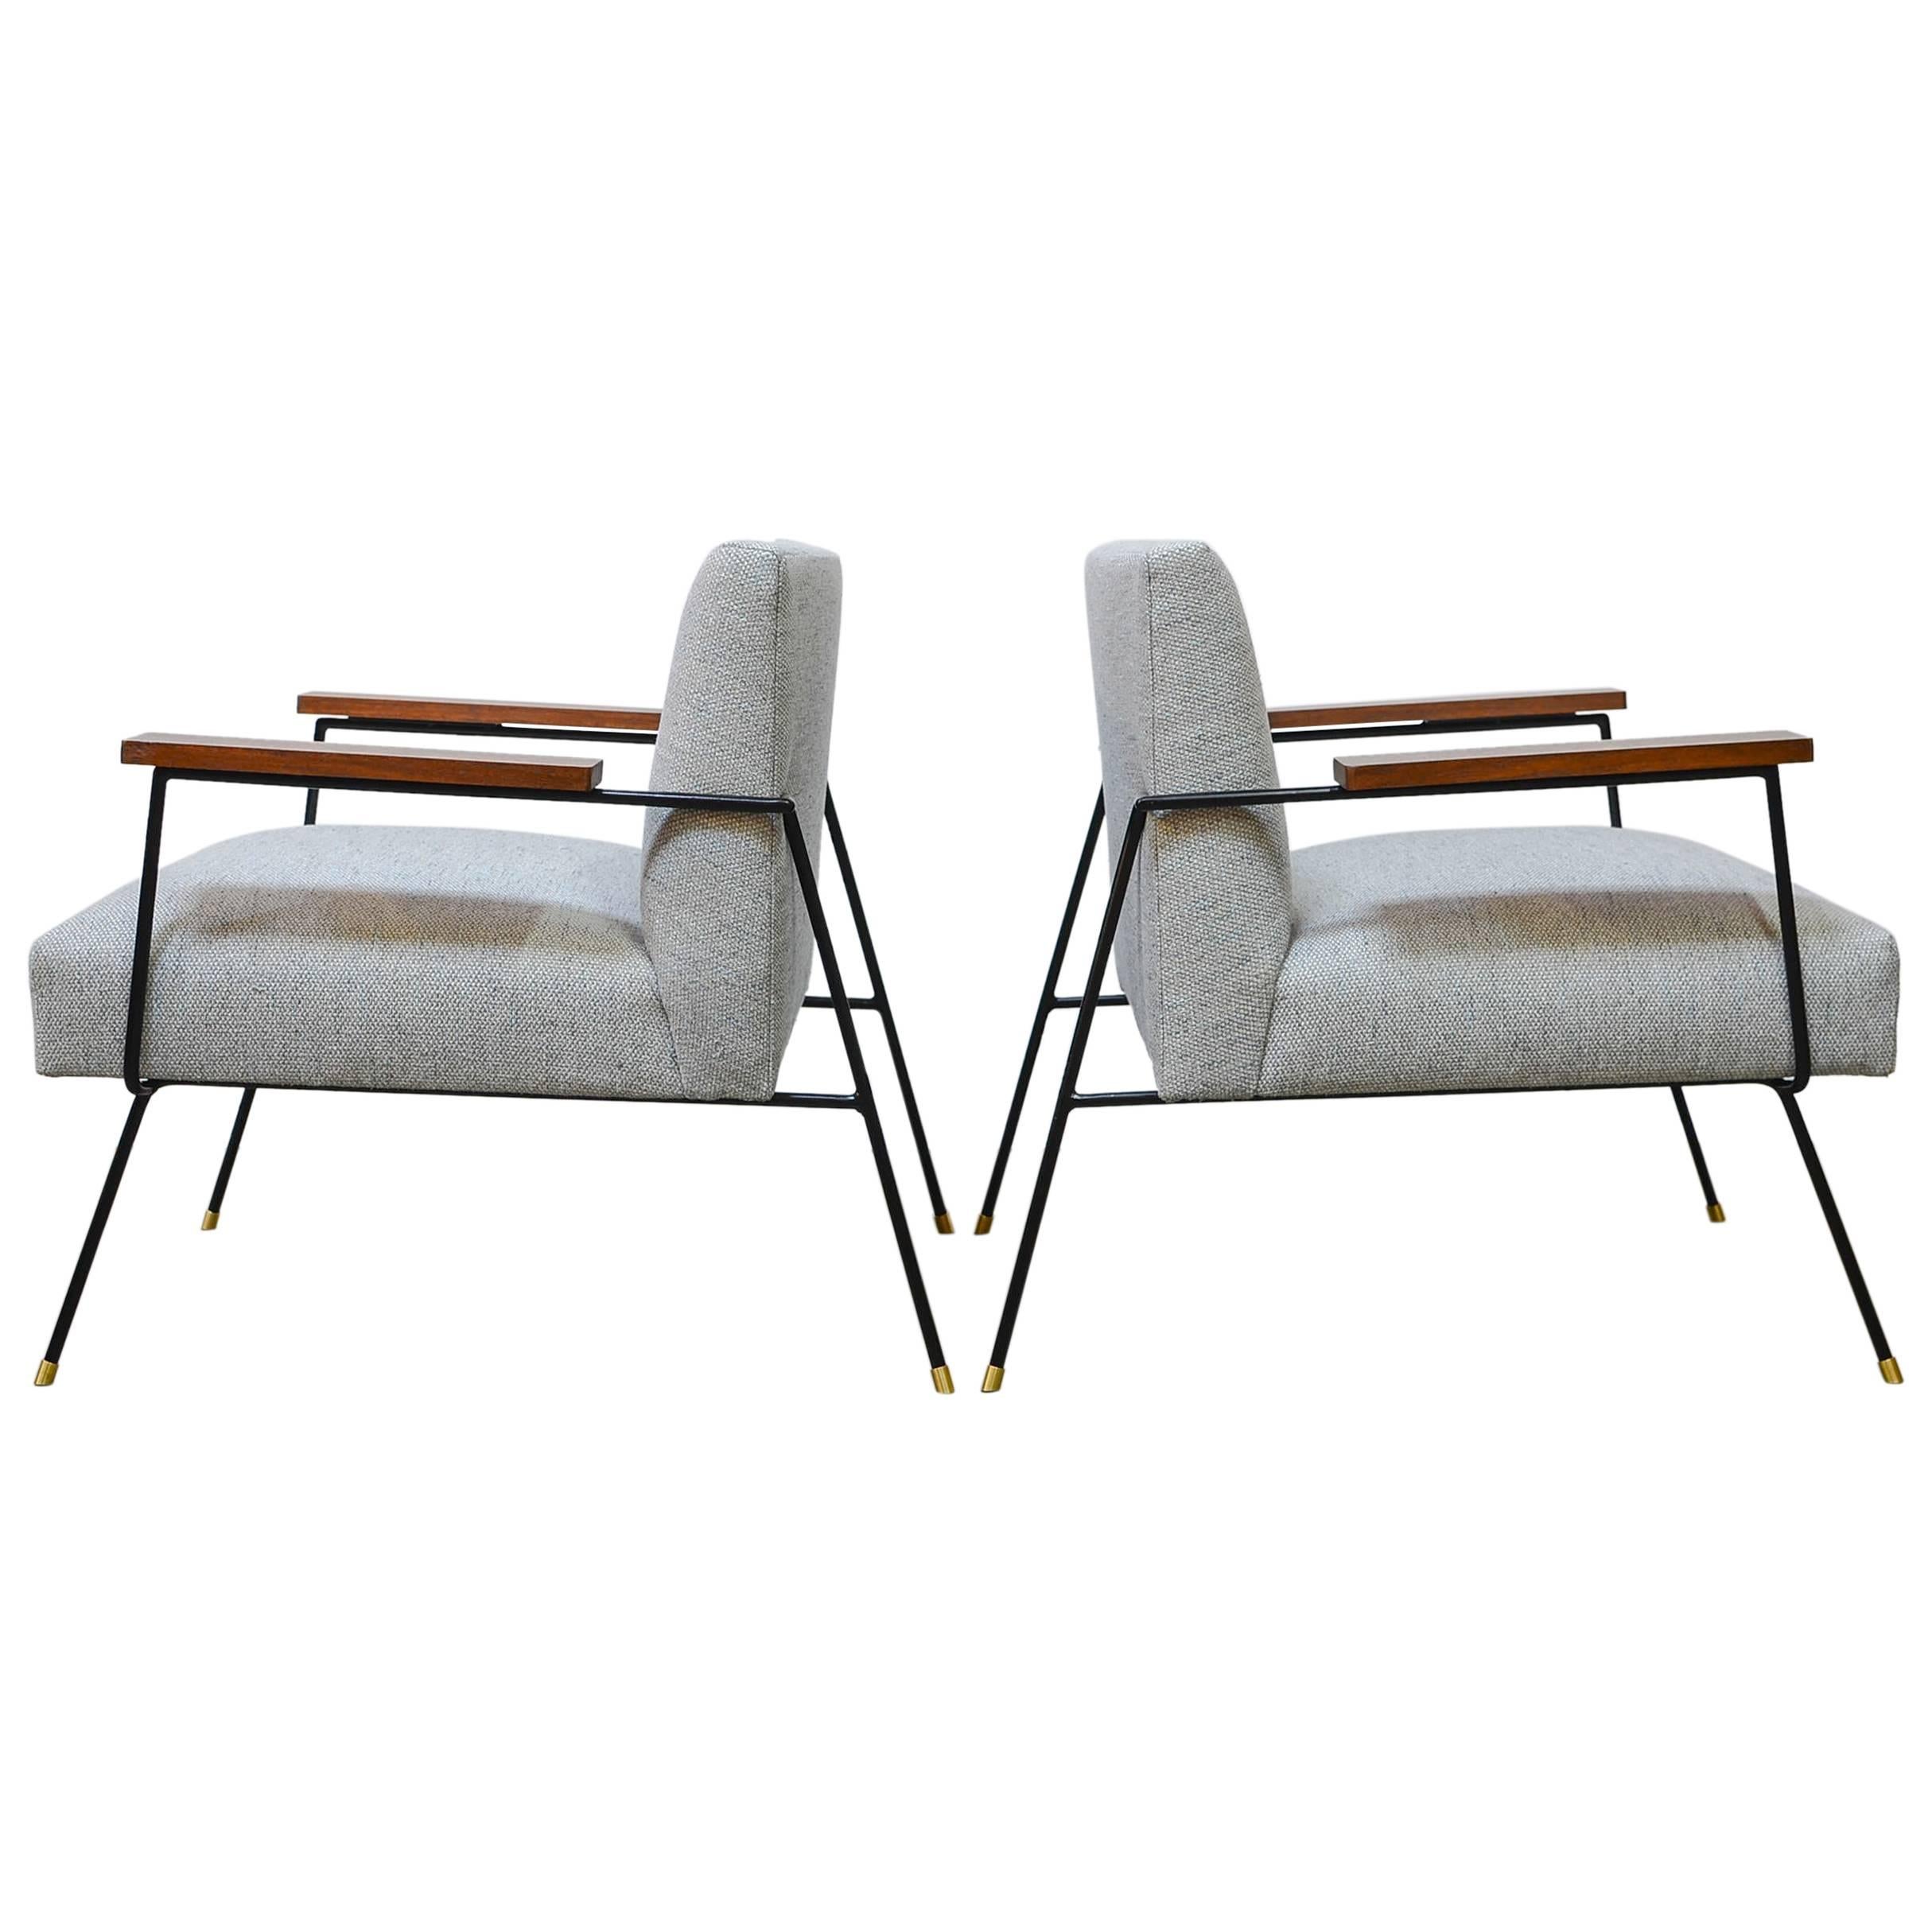 Custom iron framed lounge chairs made in house, inspired by the designs of Milo Baughman. Features an extremely comfortable upholstered floating seat consisting of springs and foam. The arm rests are made from solid walnut, and leg glides are